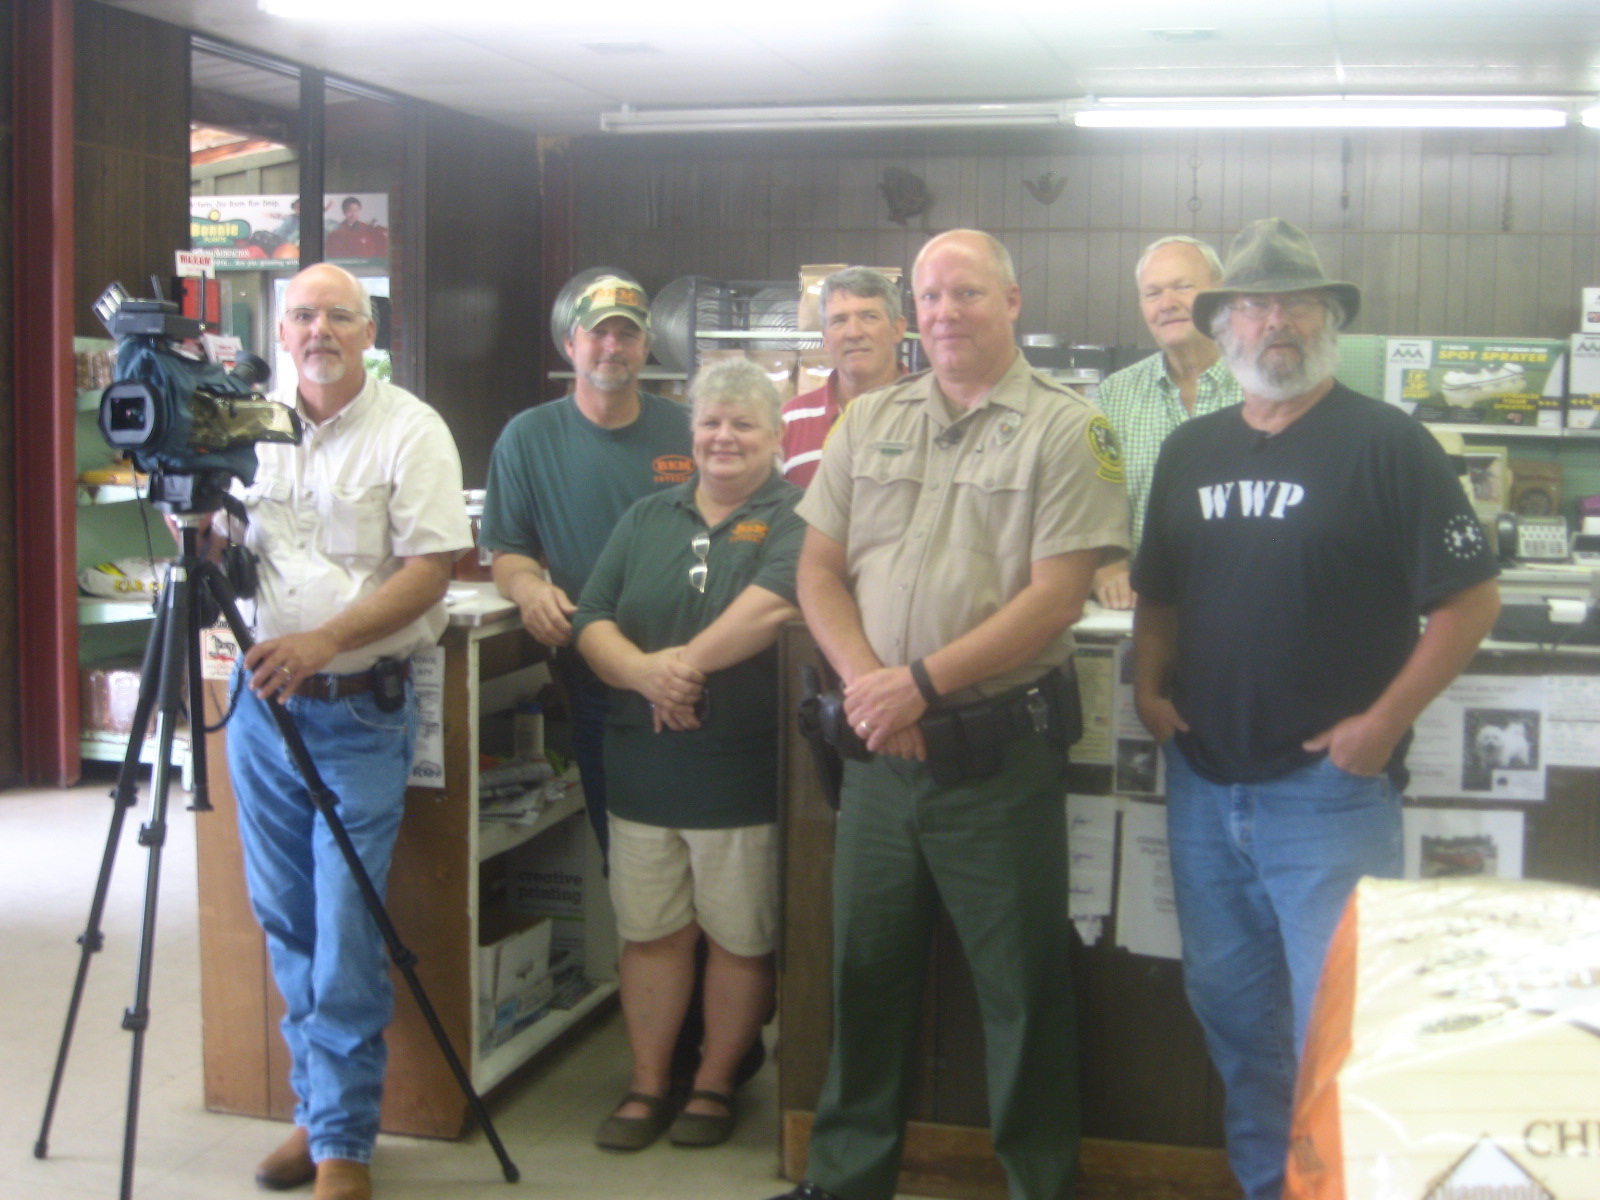 Venture Outdoors Curt Gantt, BKM Outdoors Brian Keith and "MO", Seed Processors Steve and Seth, Game Warden Keith Mann and Venture Outdoors Host Don Day